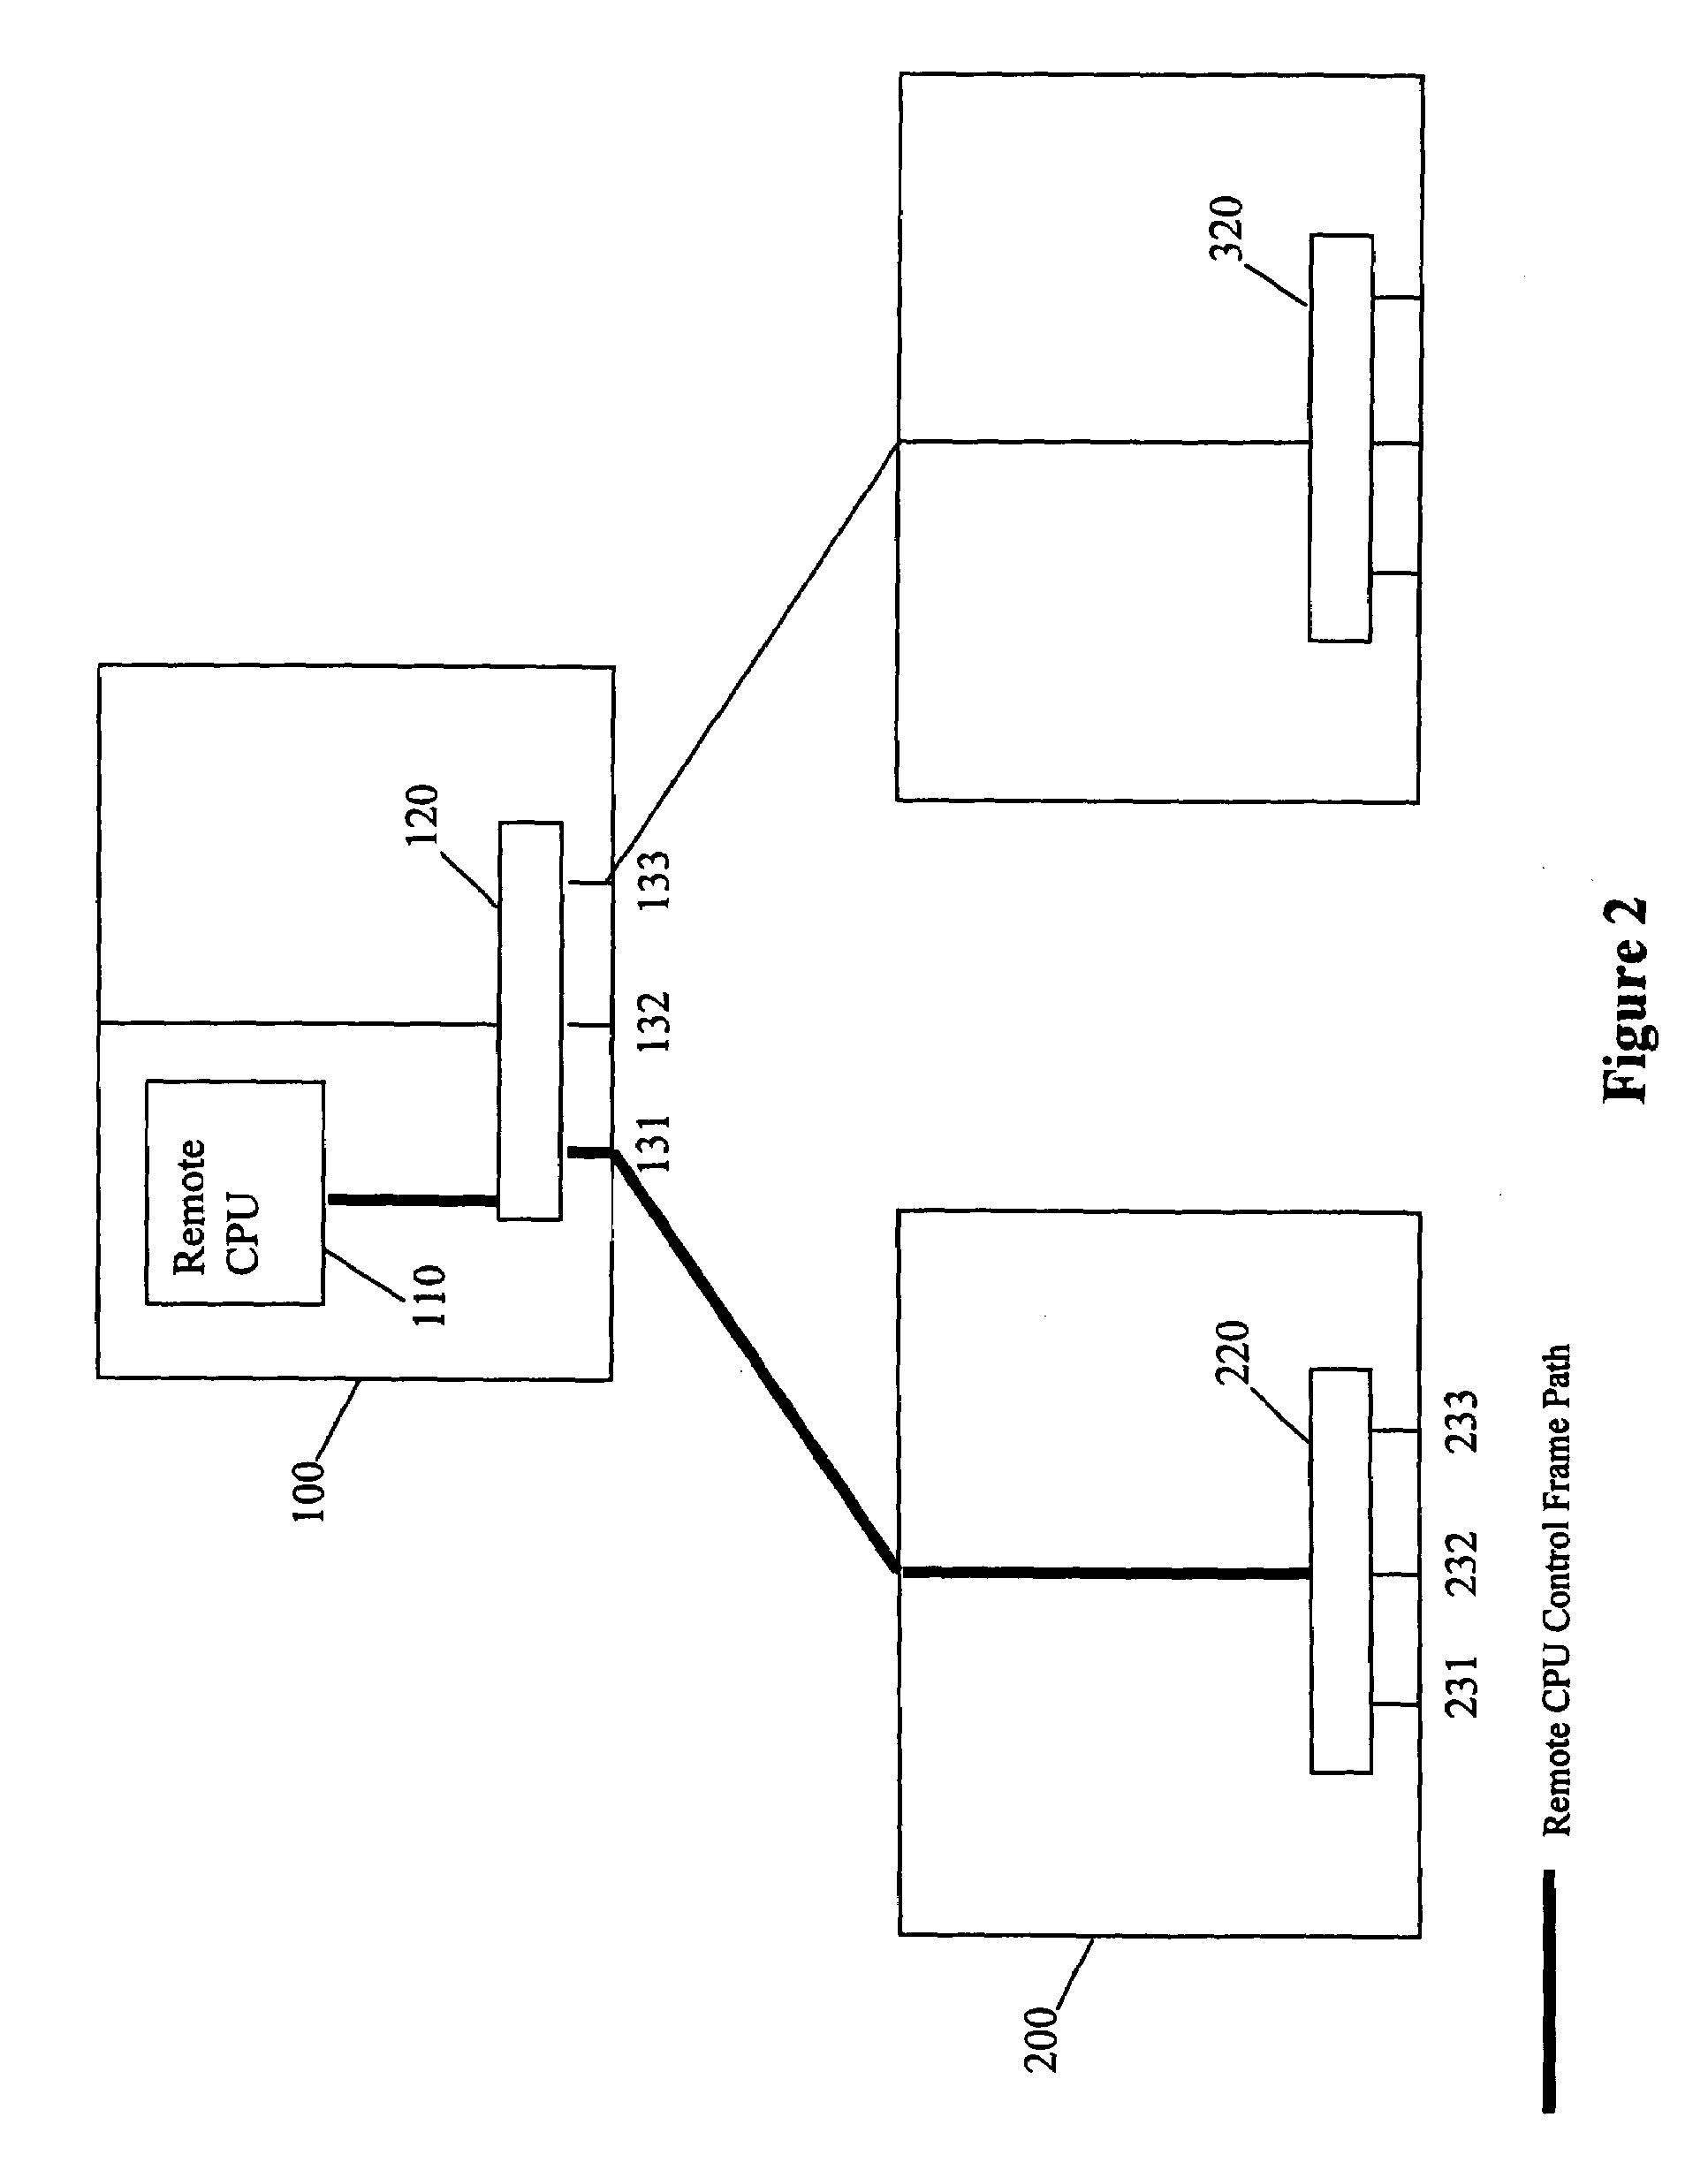 Distributed switch/router silicon engine